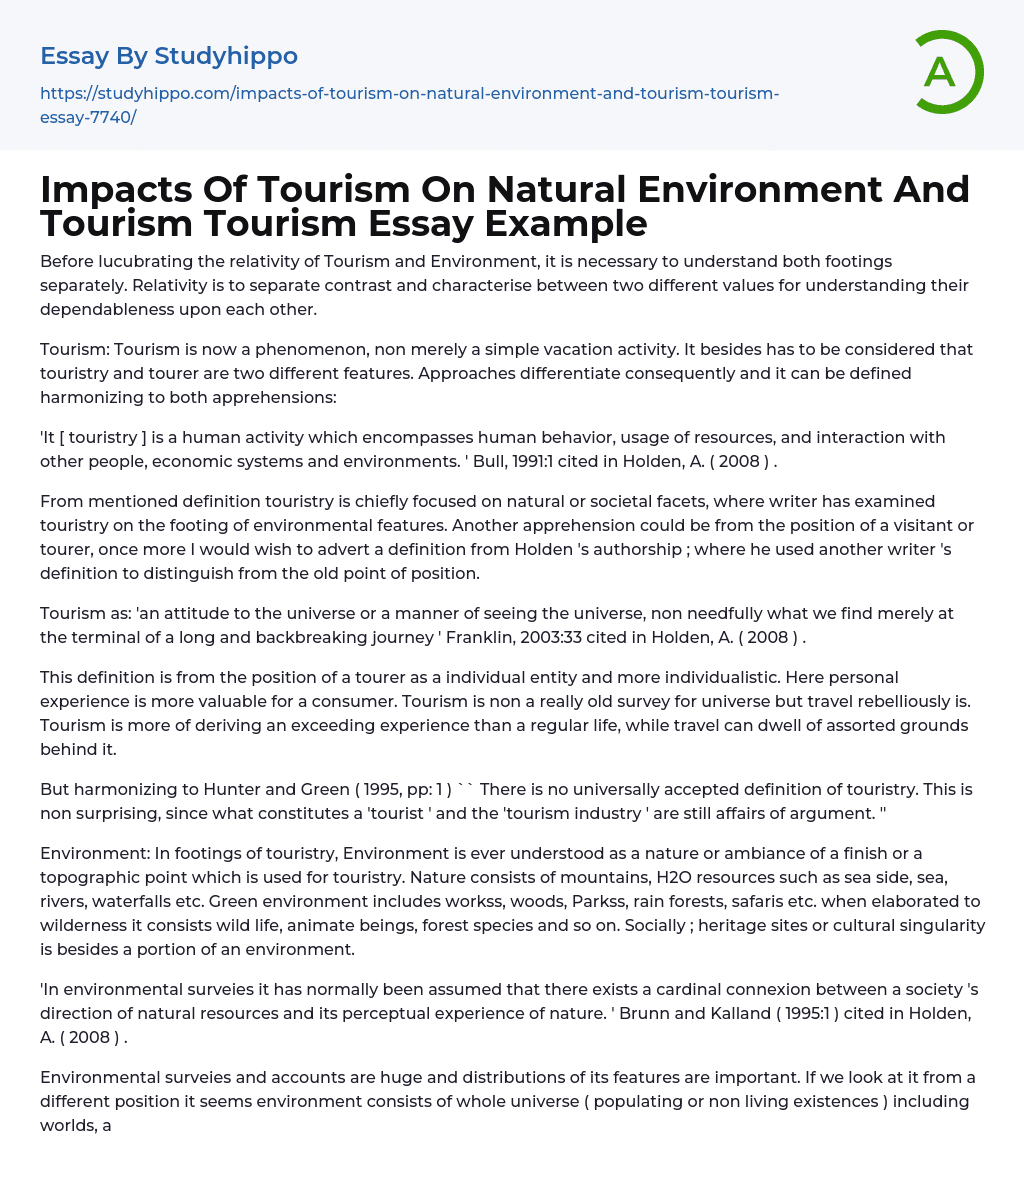 Impacts Of Tourism On Natural Environment And Tourism Tourism Essay Example